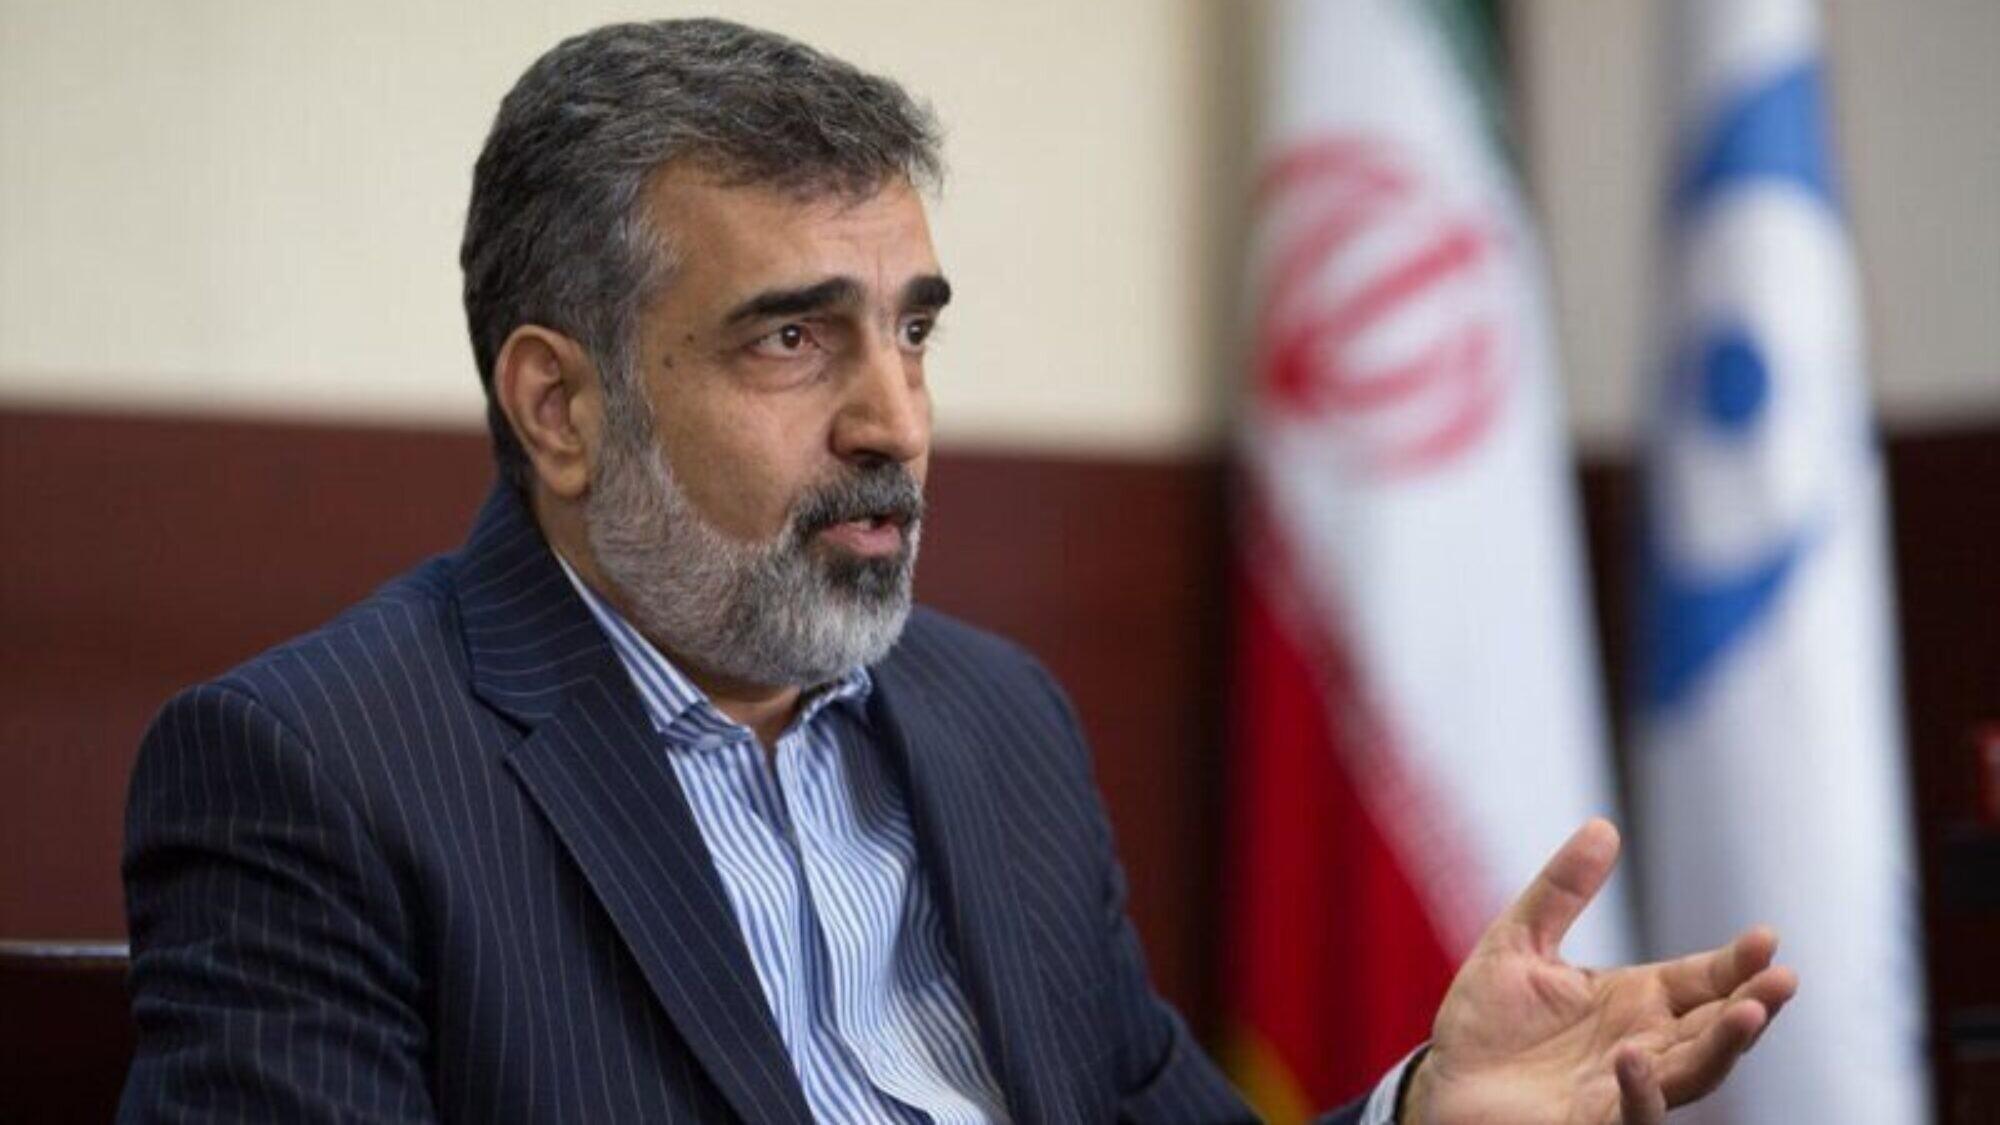 ifmat - Iran has 10 times the enriched uranium allowed by the JCPOA